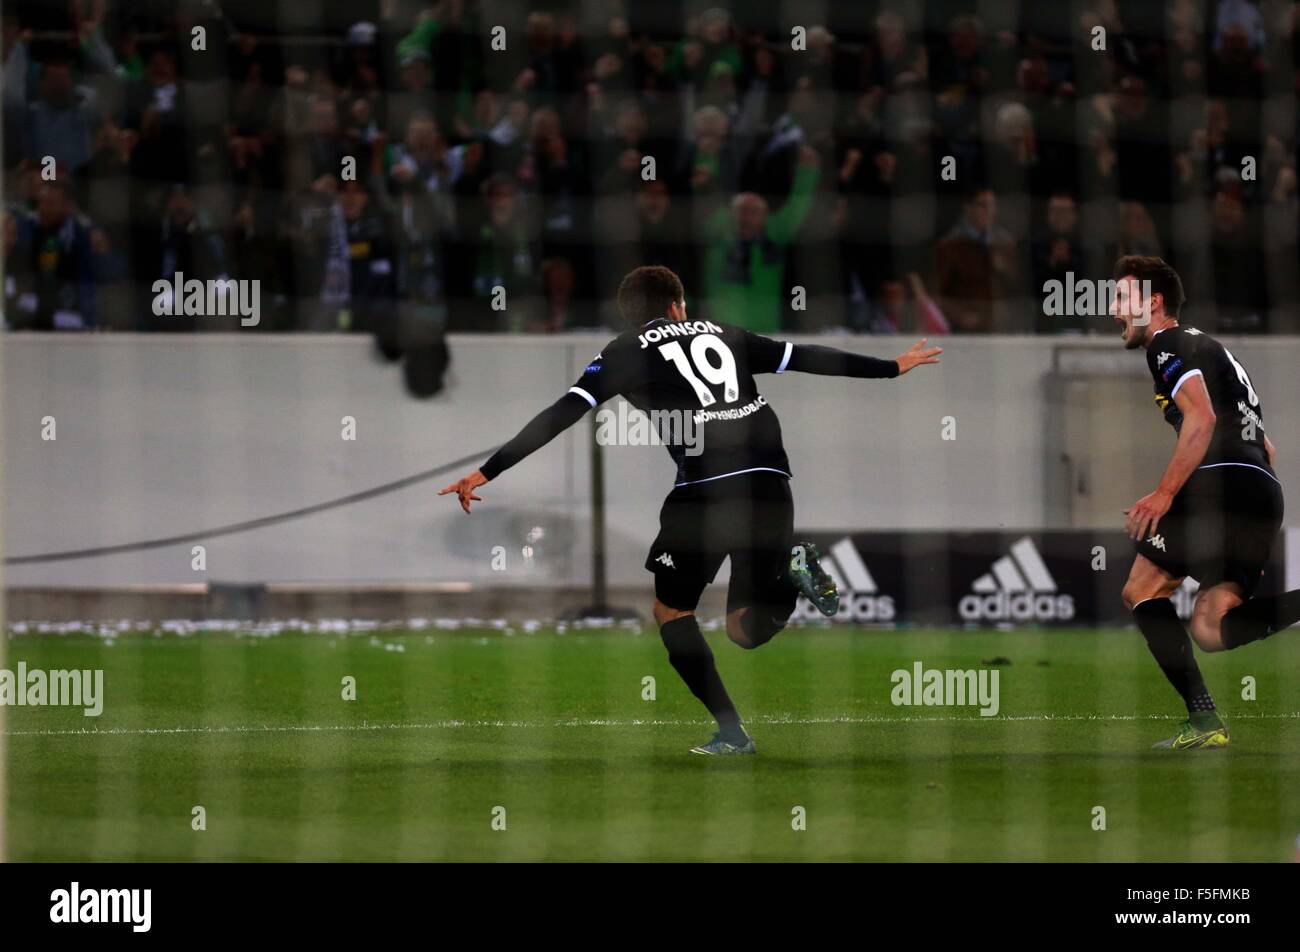 Moenchengladbach, Germany. 3rd Nov, 2015. Fabian Johnson (L) of Moenchengladbach celebrates scoring during the UEFA Champions League Group D match against Juventus in Moenchengladbach, Germany, on November 3, 2015. The match ended with 1-1. © Luo Huanhuan/Xinhua/Alamy Live News Stock Photo